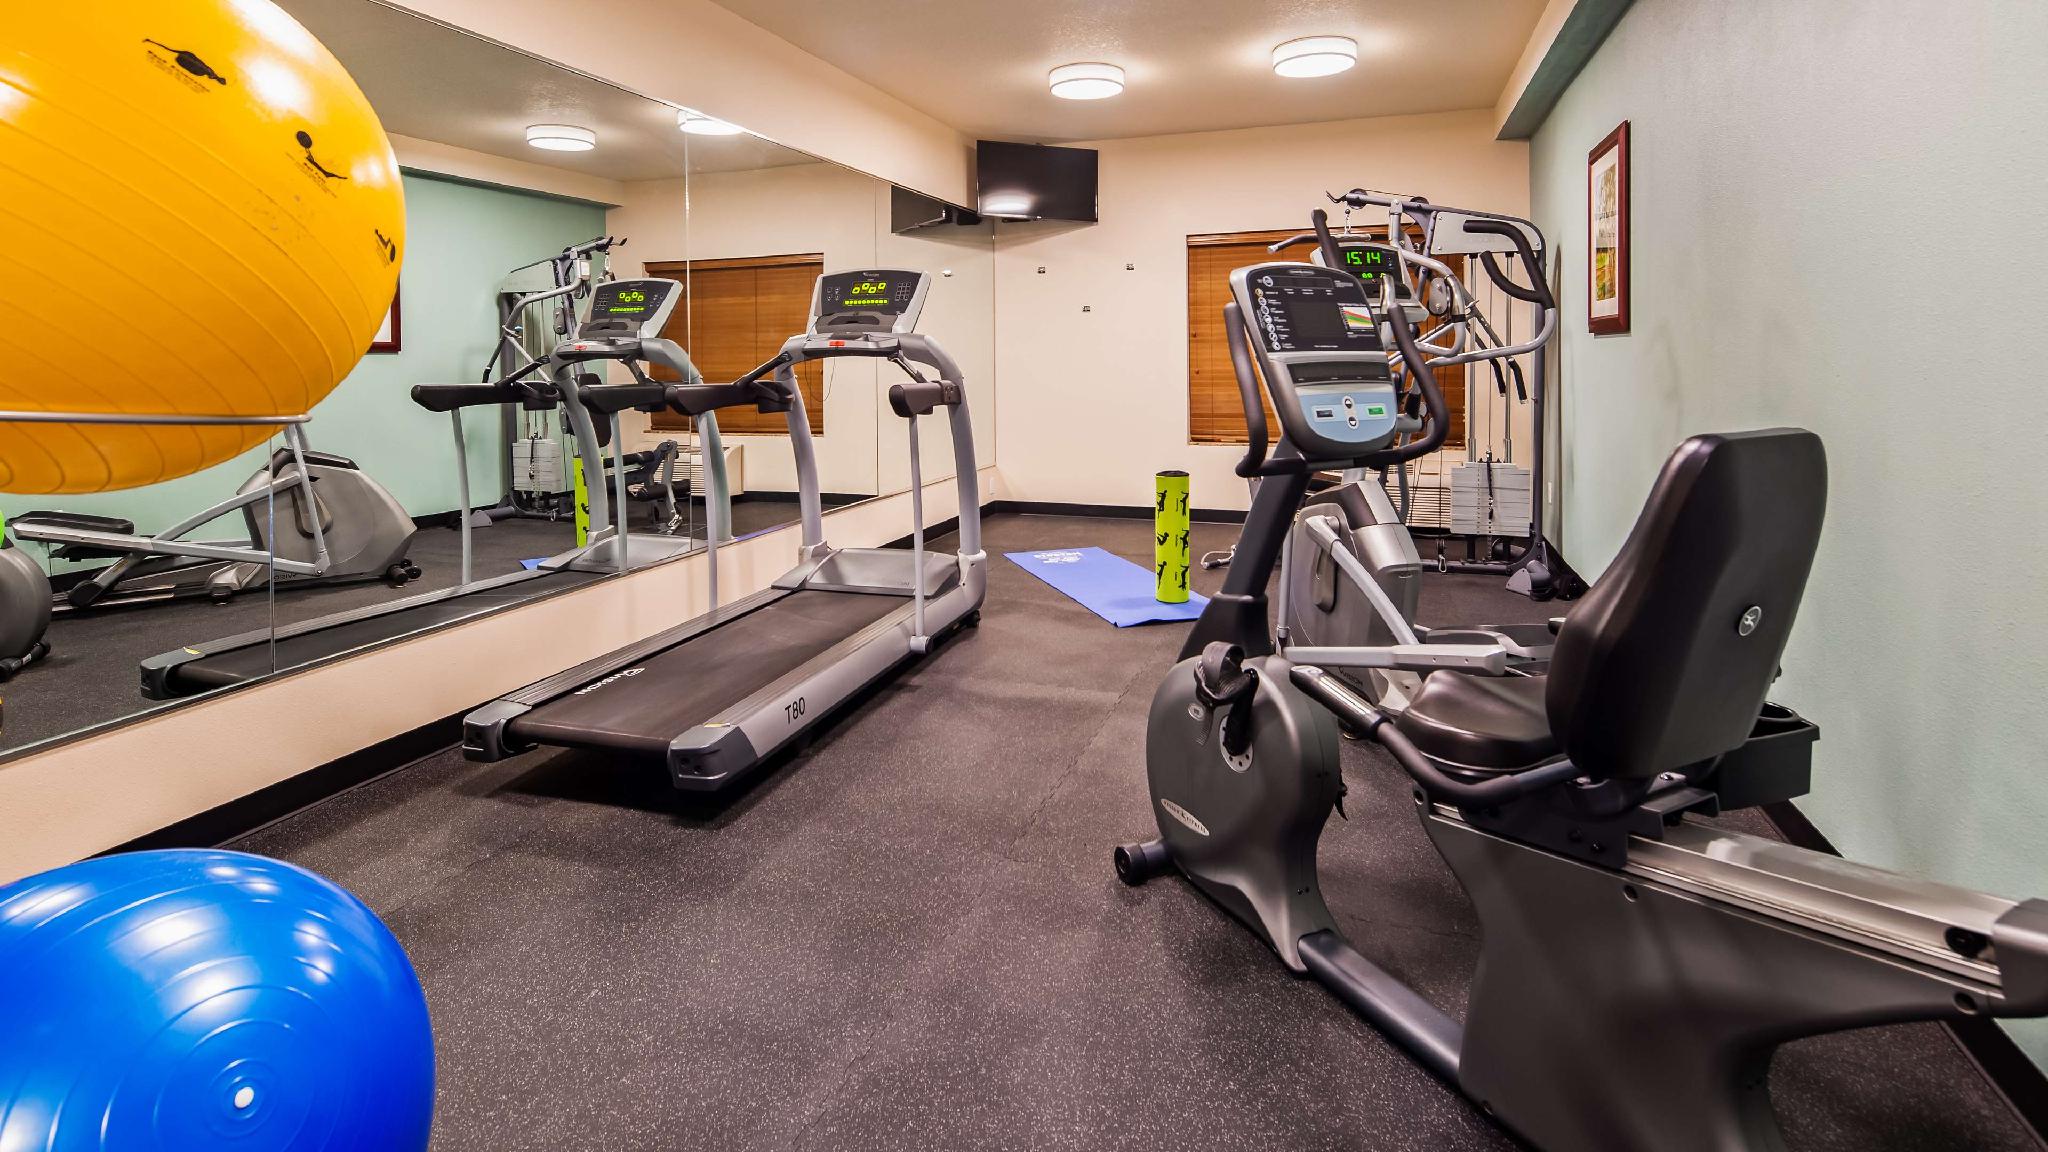 Fitness center with treadmill and stationary bike trainer